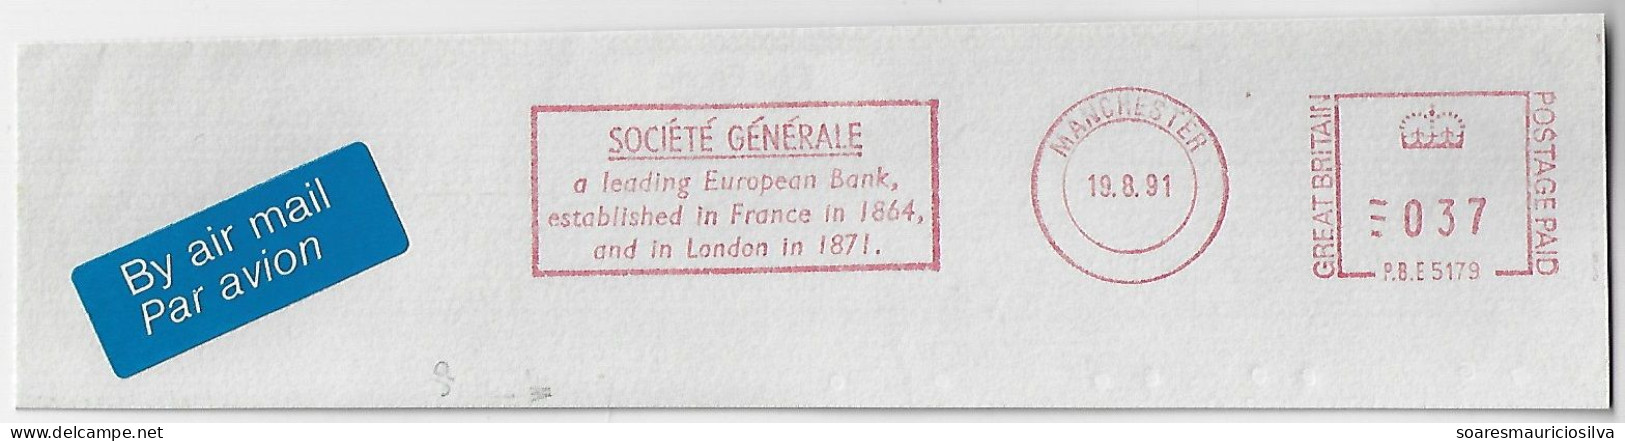 Great Britain 1991 Meter Stamp Pitney Bowes 5000 Series With Slogan By Société Générale Bank In Manchester - Storia Postale